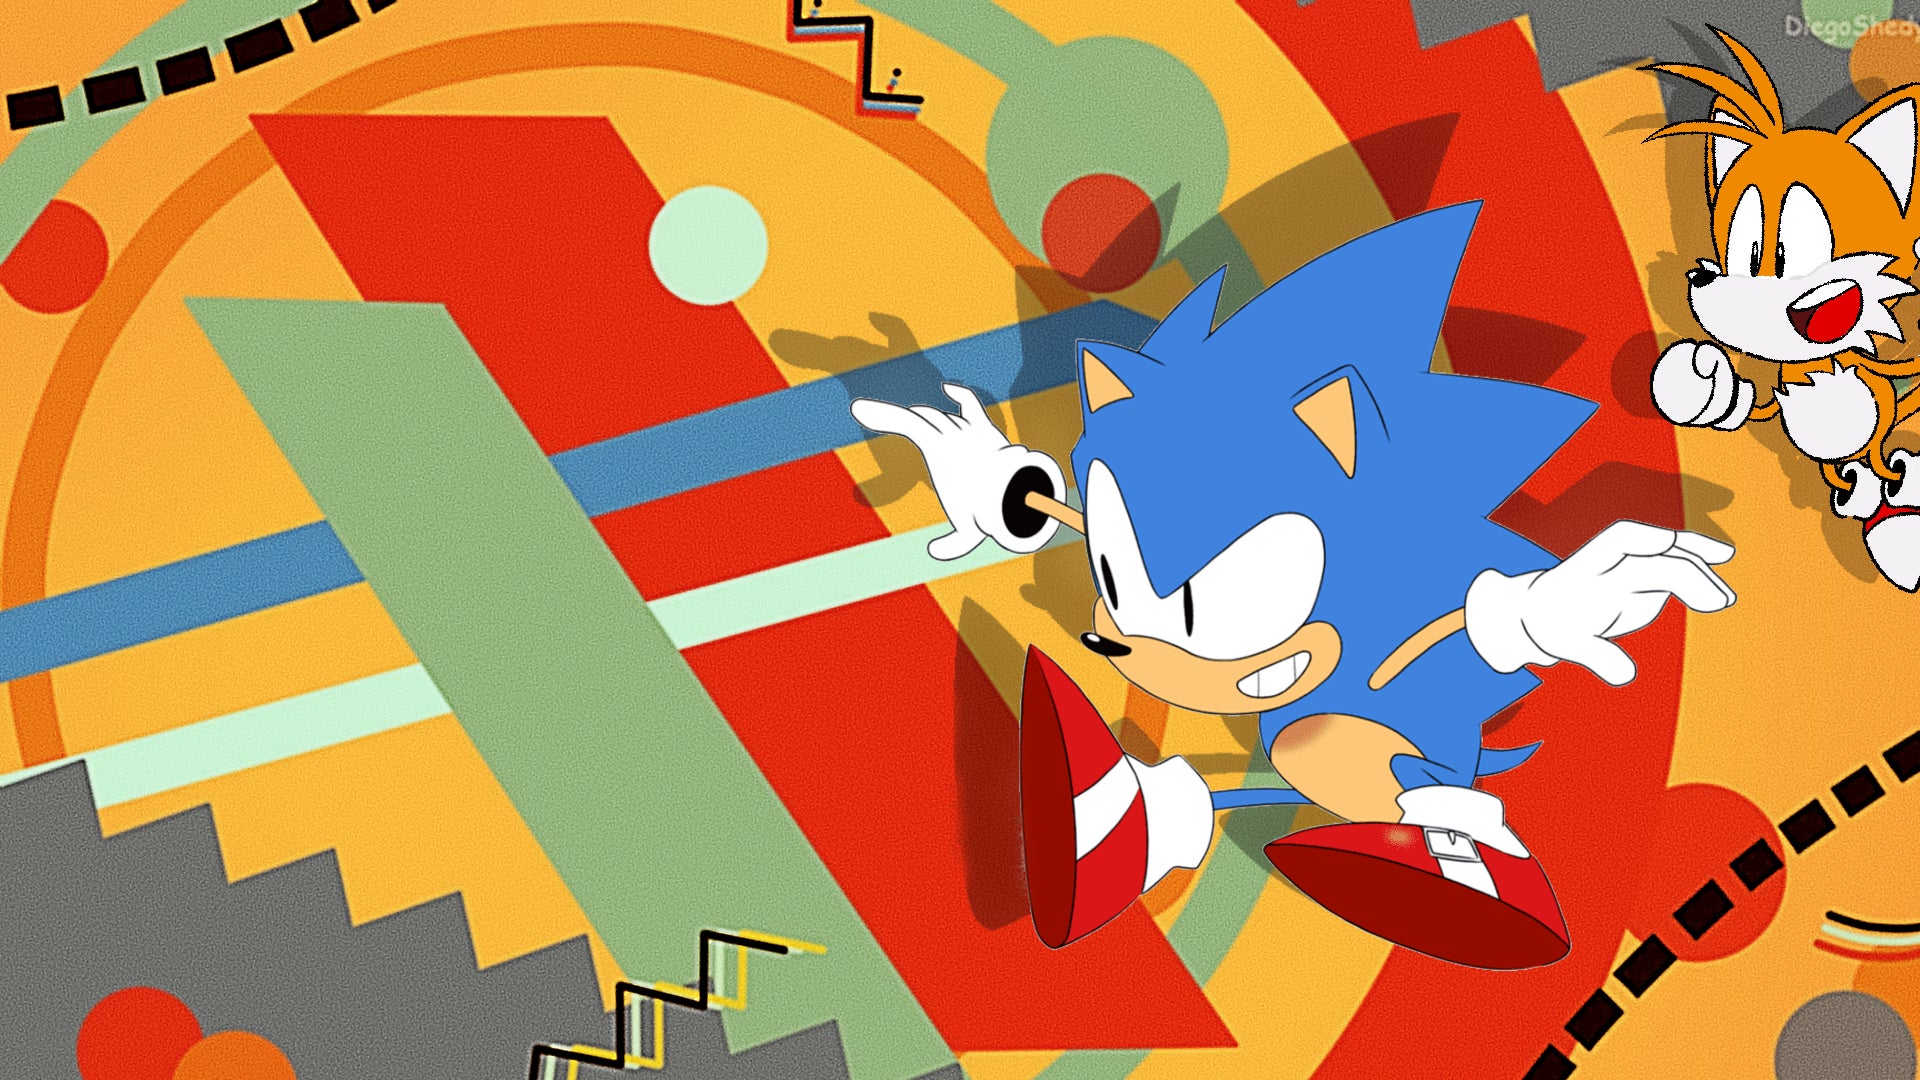 Sonic Mania Wallpapers